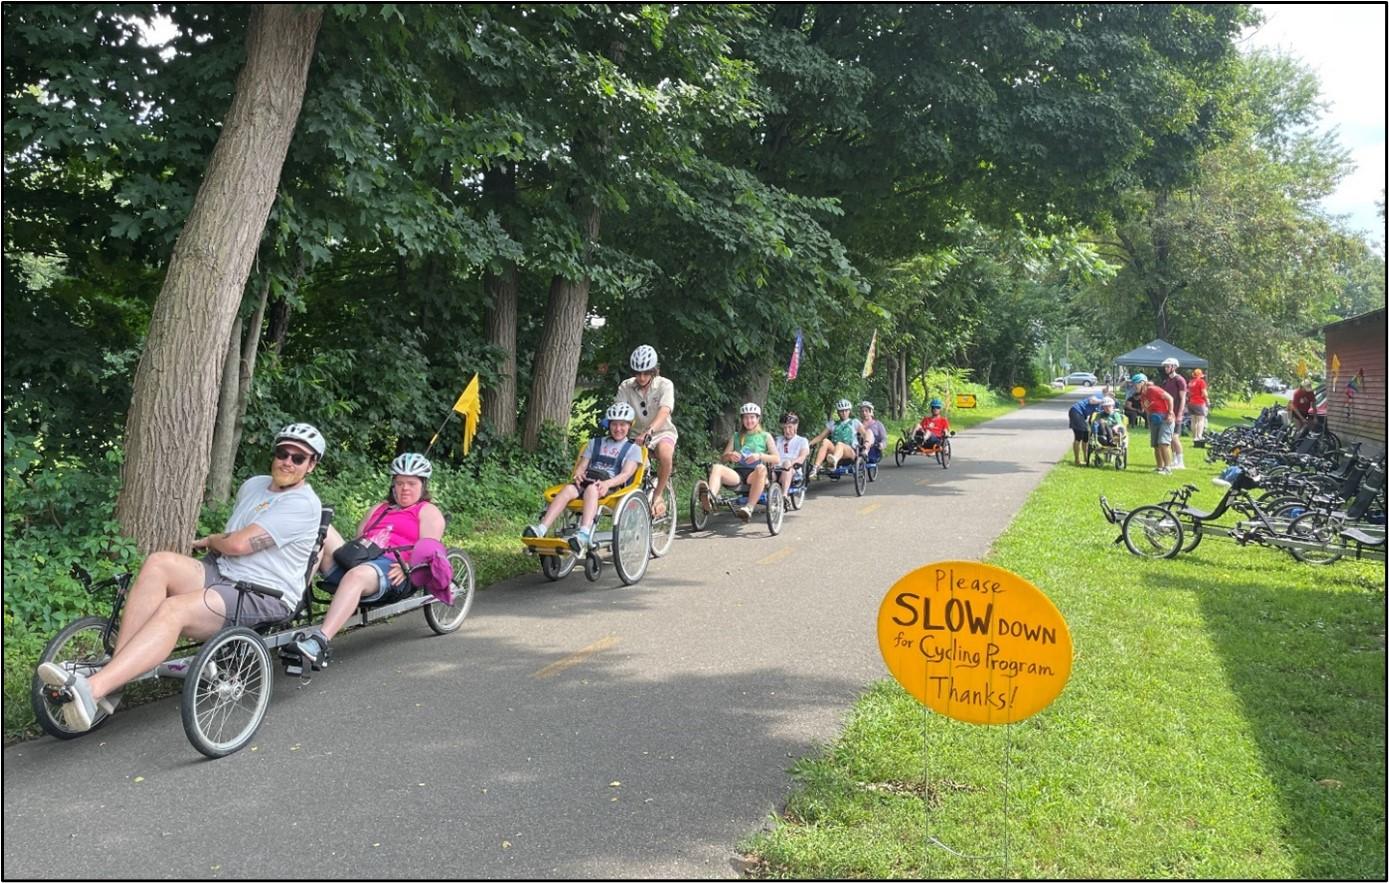 A group riding different types of cycles on a paved bike path.  Other cycles are parked on the side of the path. A sign in front says "Please Slow Down for Cycling Program. Thanks!"